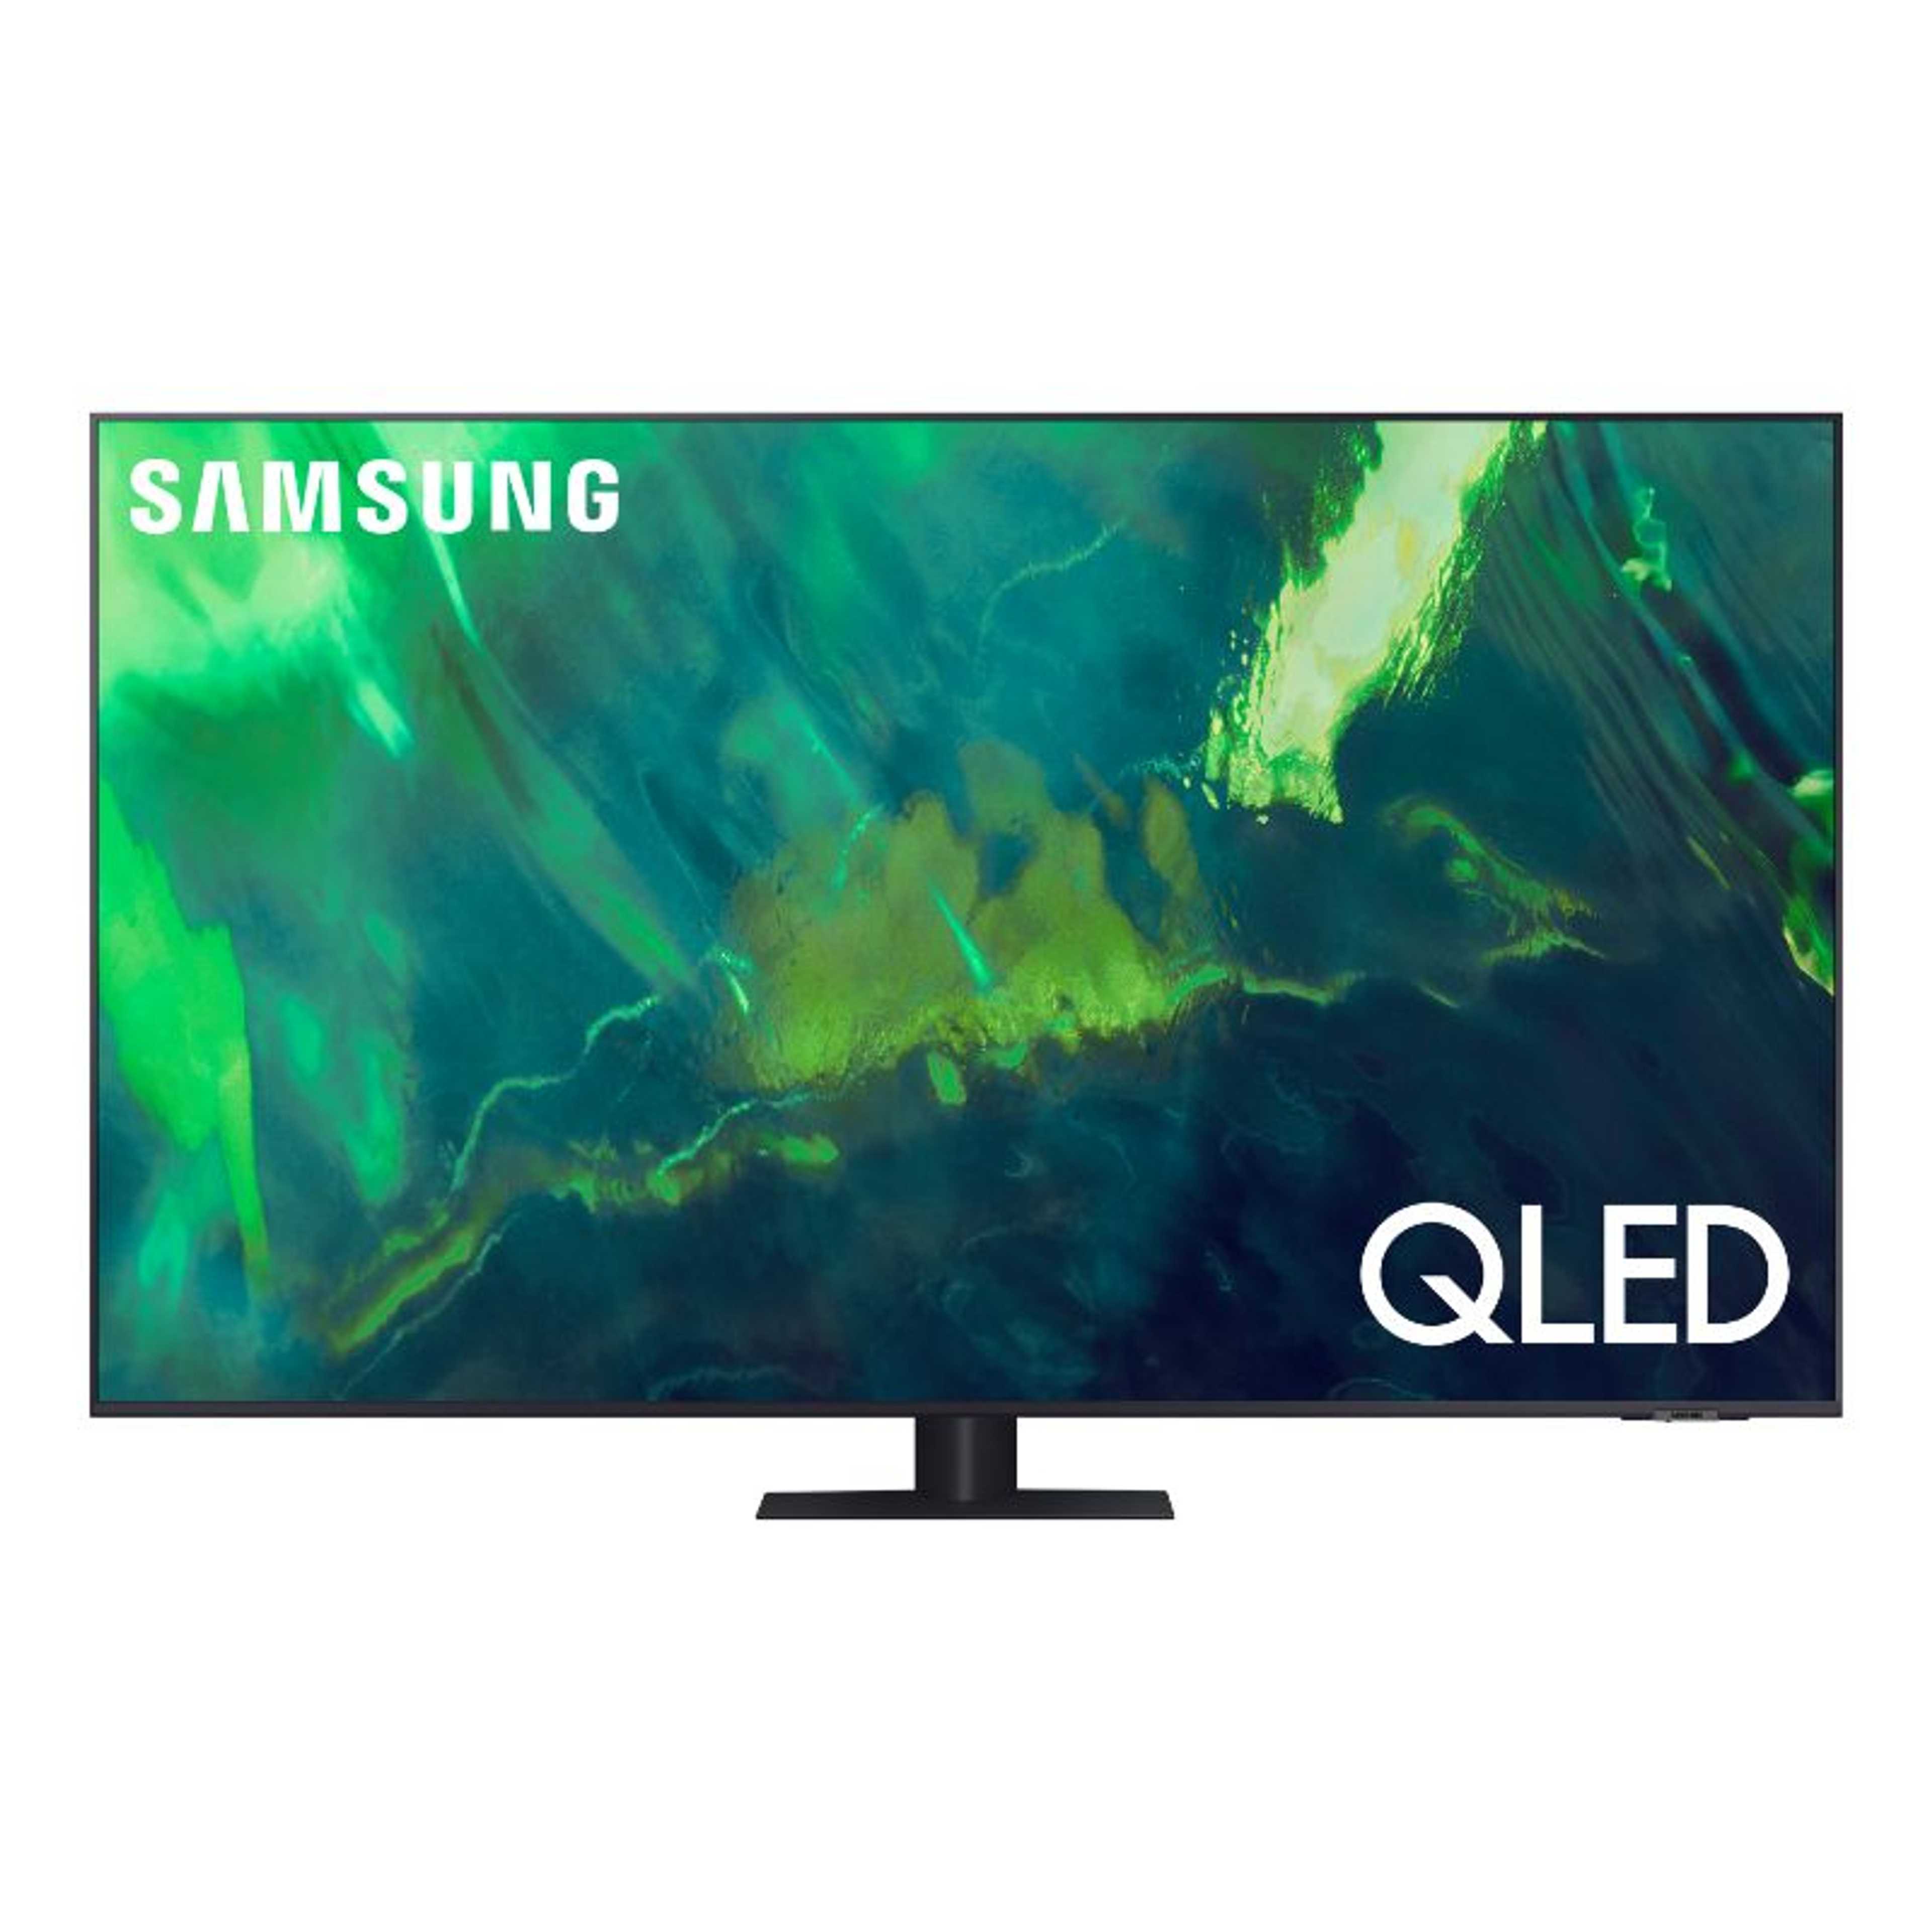 Samsung 55 Inches QLED 4K Smart TV 5570A